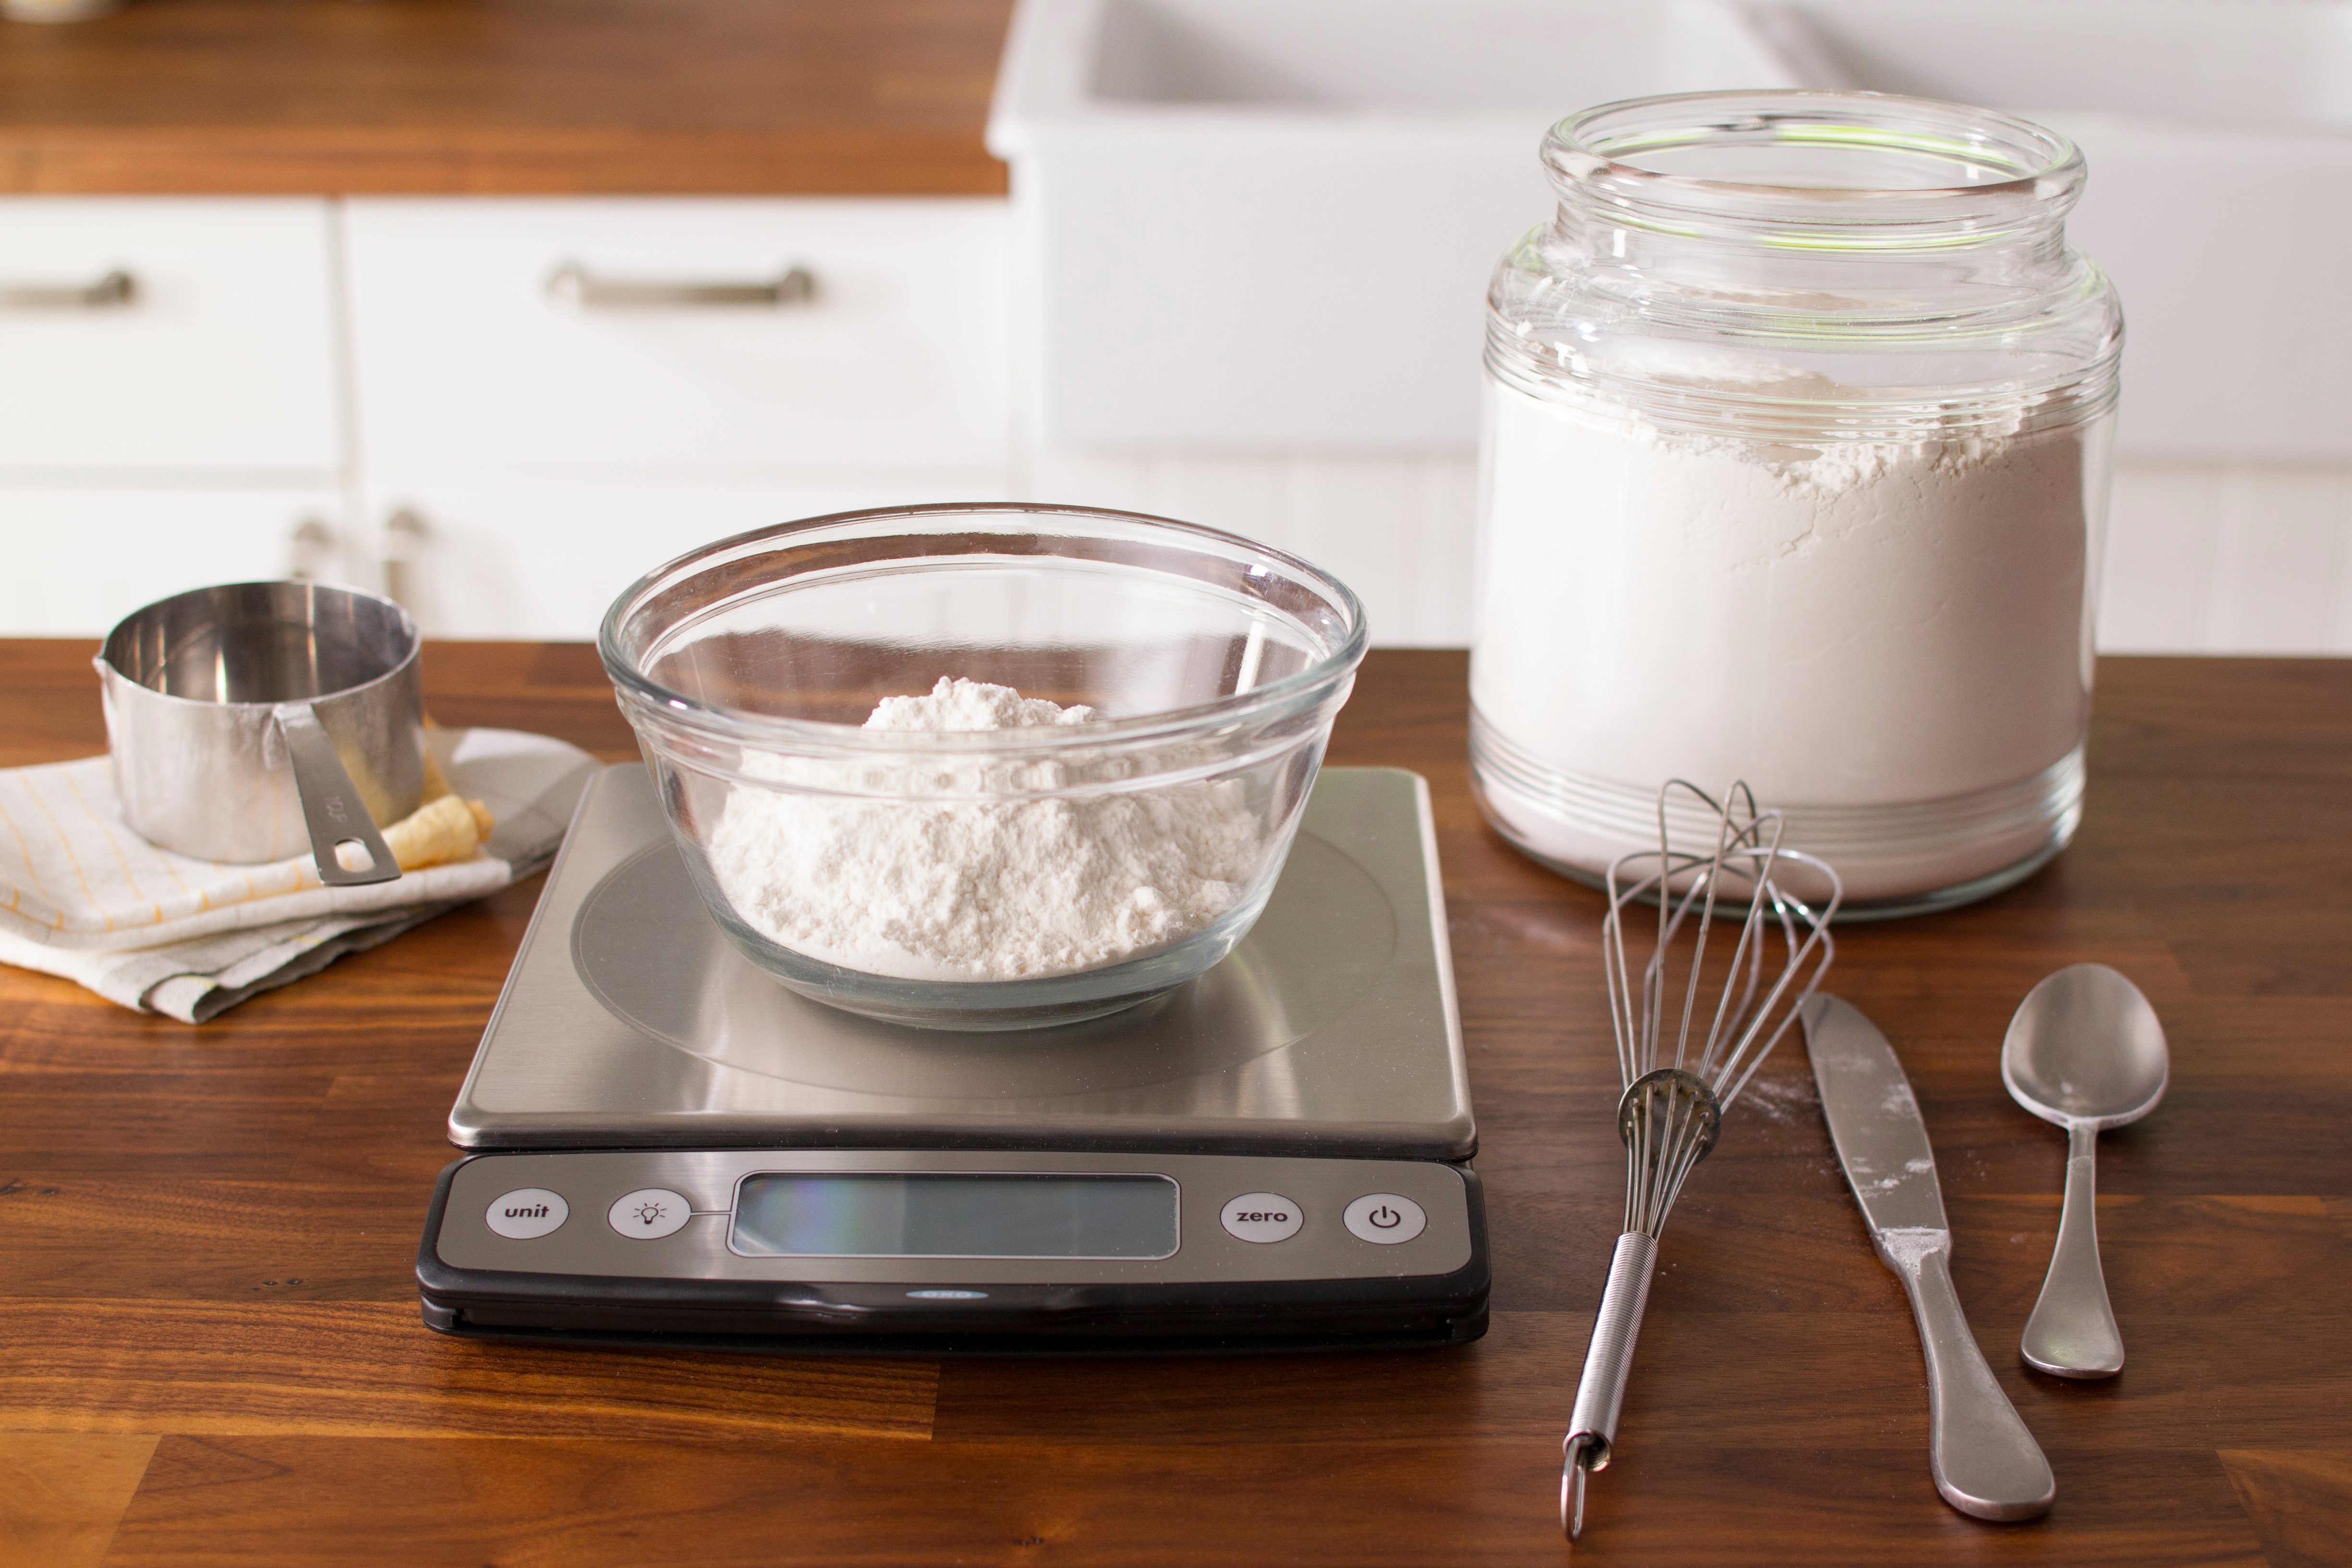 Why Is It Important to Weigh Ingredients When Cooking?